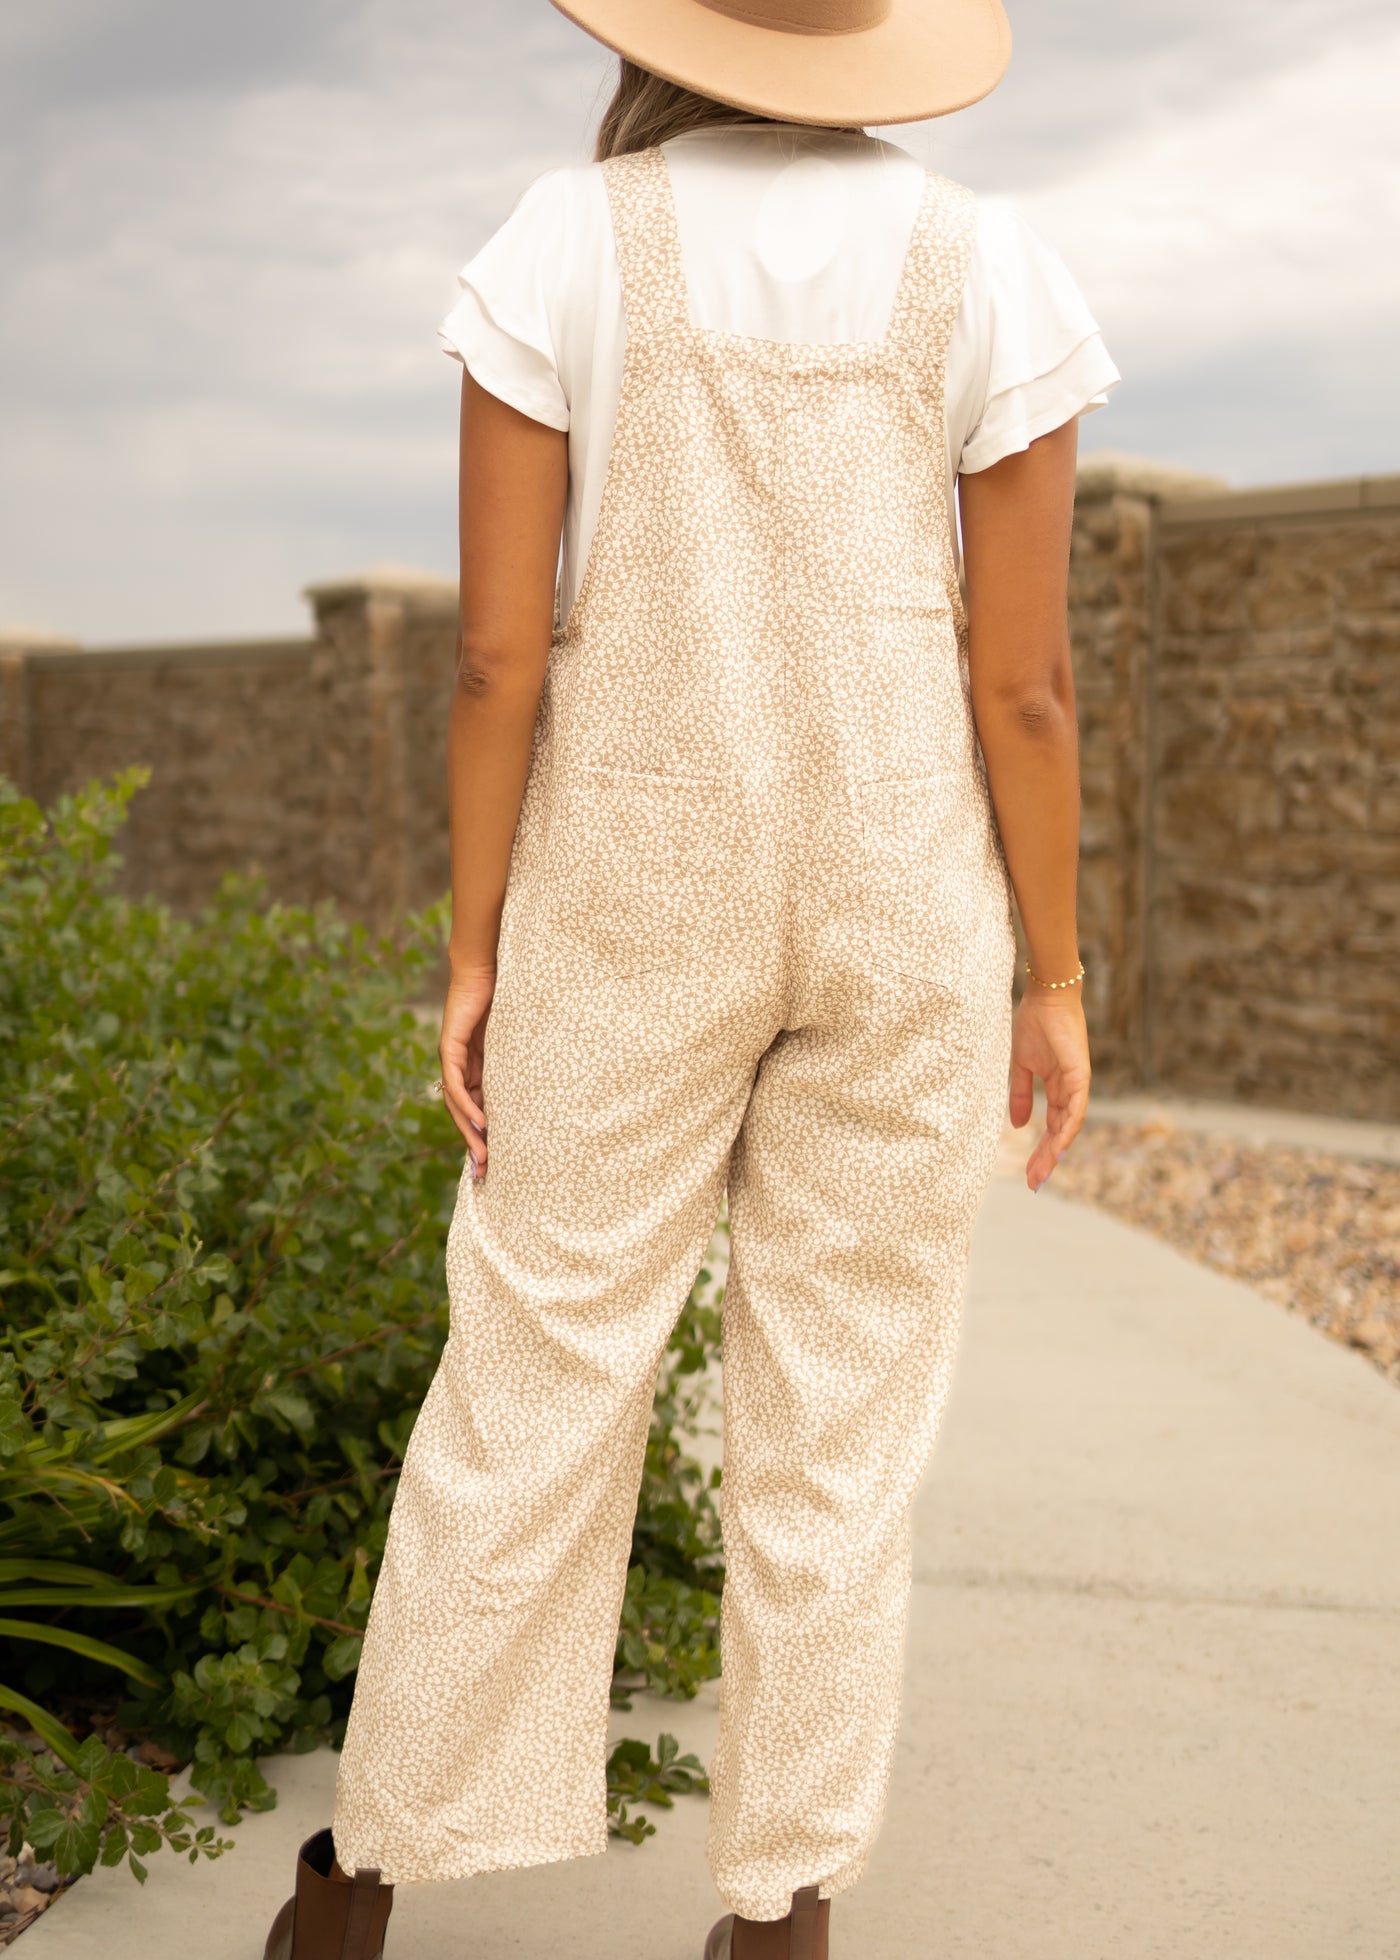 Back view of beige overalls